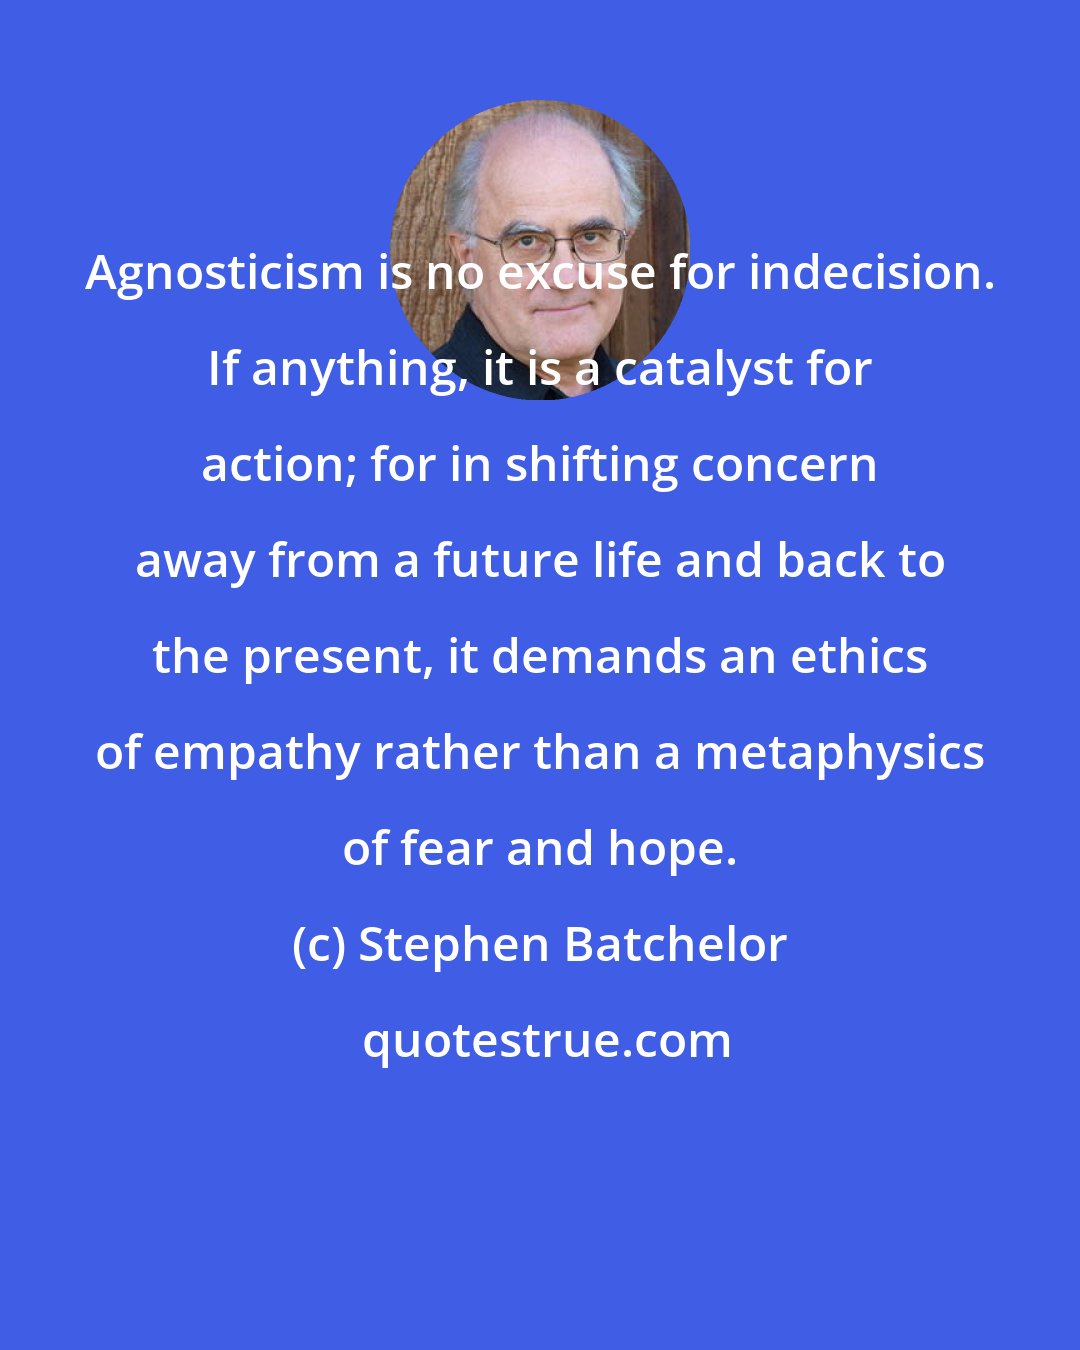 Stephen Batchelor: Agnosticism is no excuse for indecision. If anything, it is a catalyst for action; for in shifting concern away from a future life and back to the present, it demands an ethics of empathy rather than a metaphysics of fear and hope.